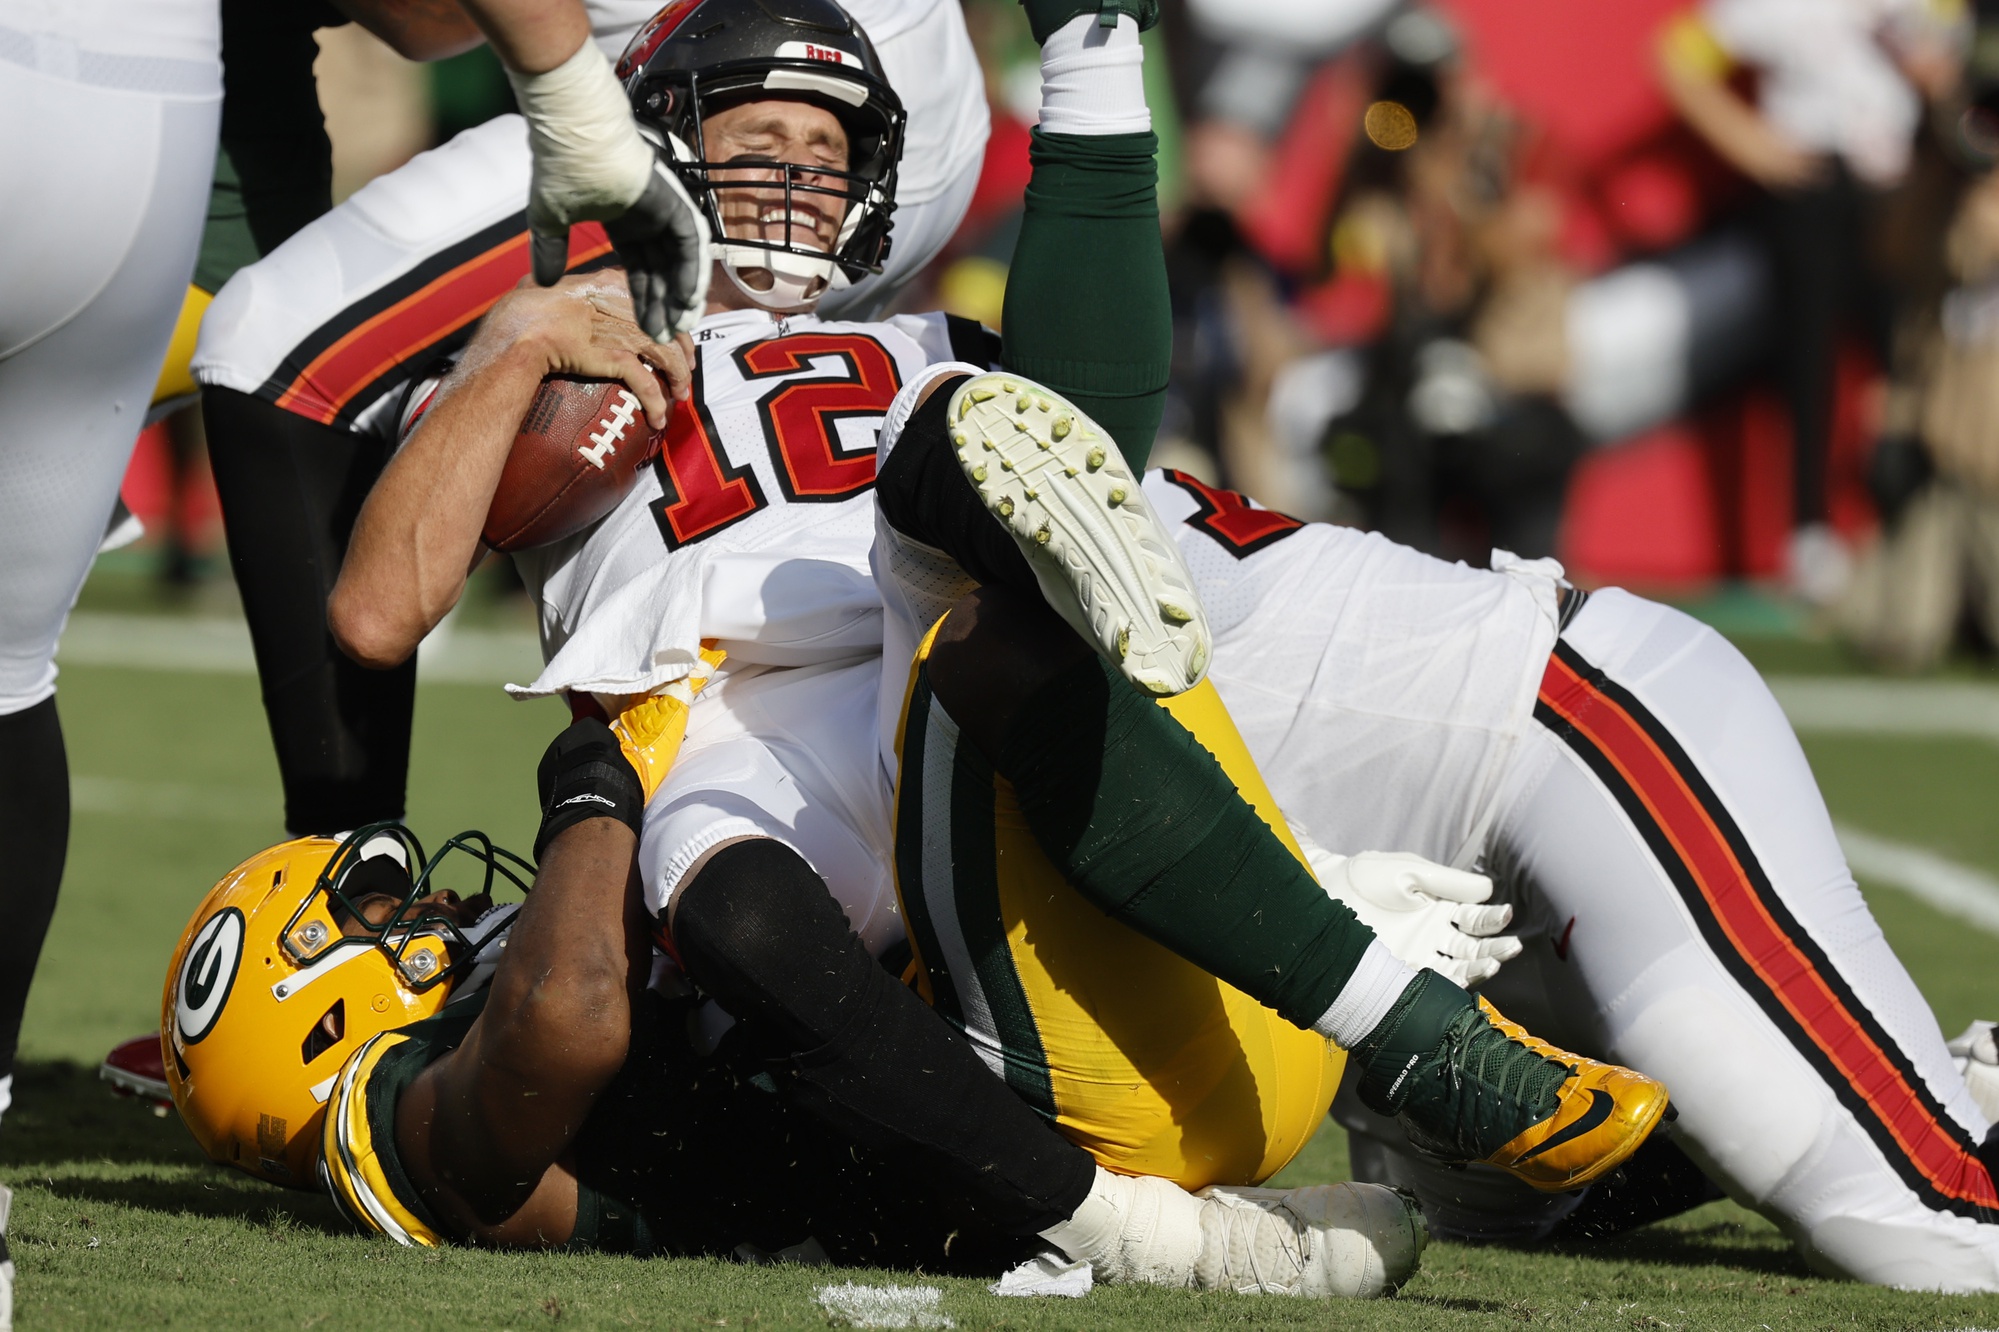 Highlights: Green Bay Packers 14-12 Tampa Bay Buccaneers in NFL